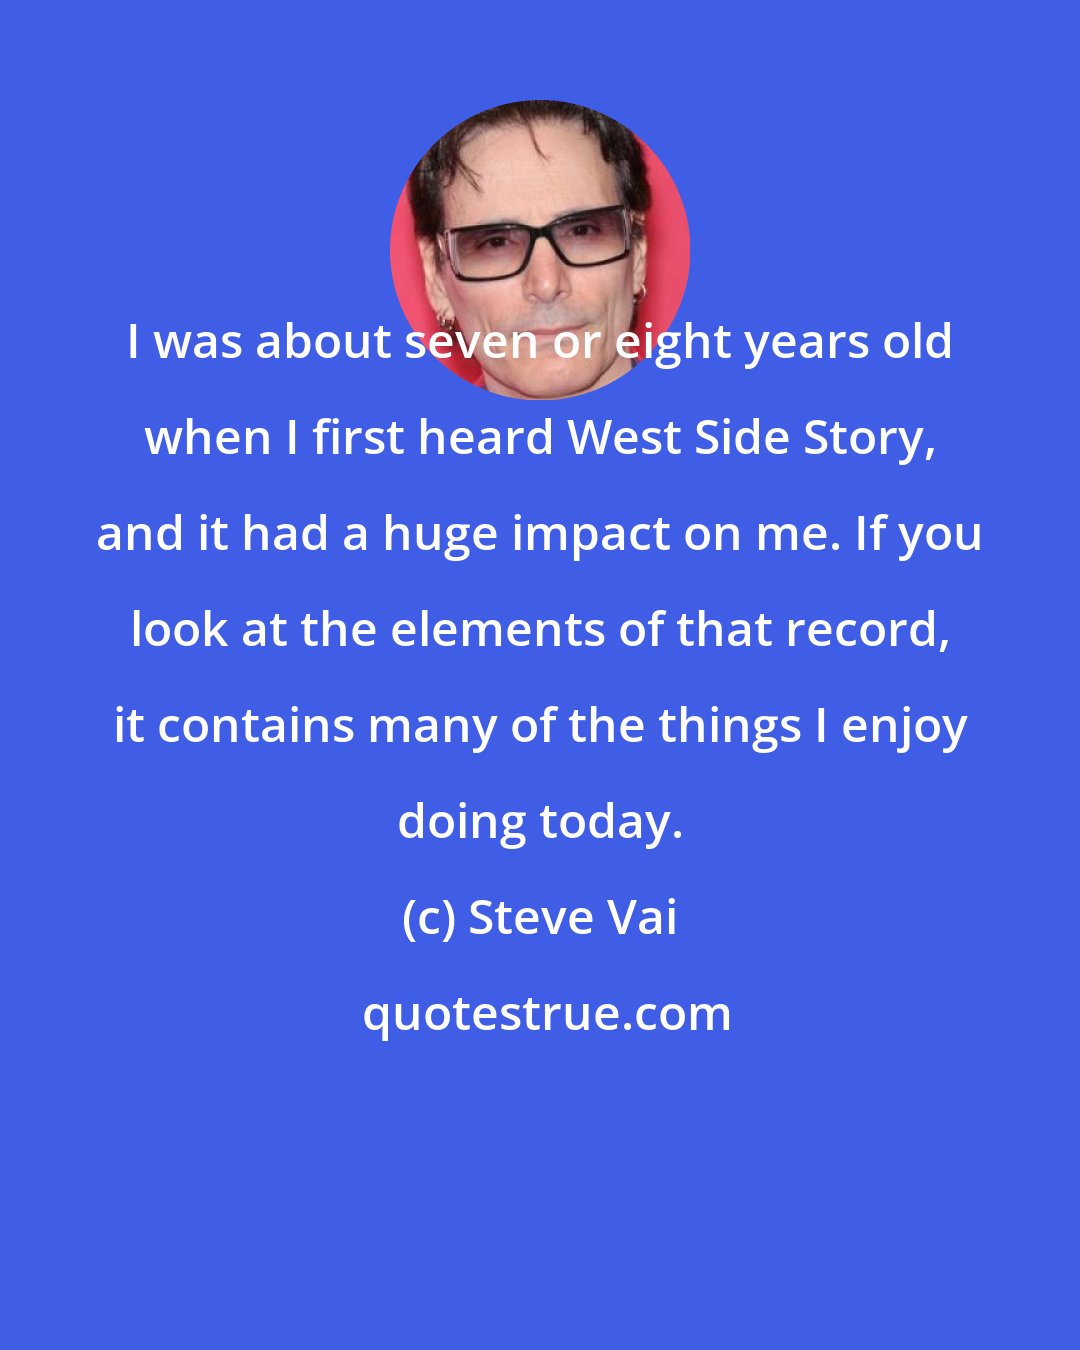 Steve Vai: I was about seven or eight years old when I first heard West Side Story, and it had a huge impact on me. If you look at the elements of that record, it contains many of the things I enjoy doing today.